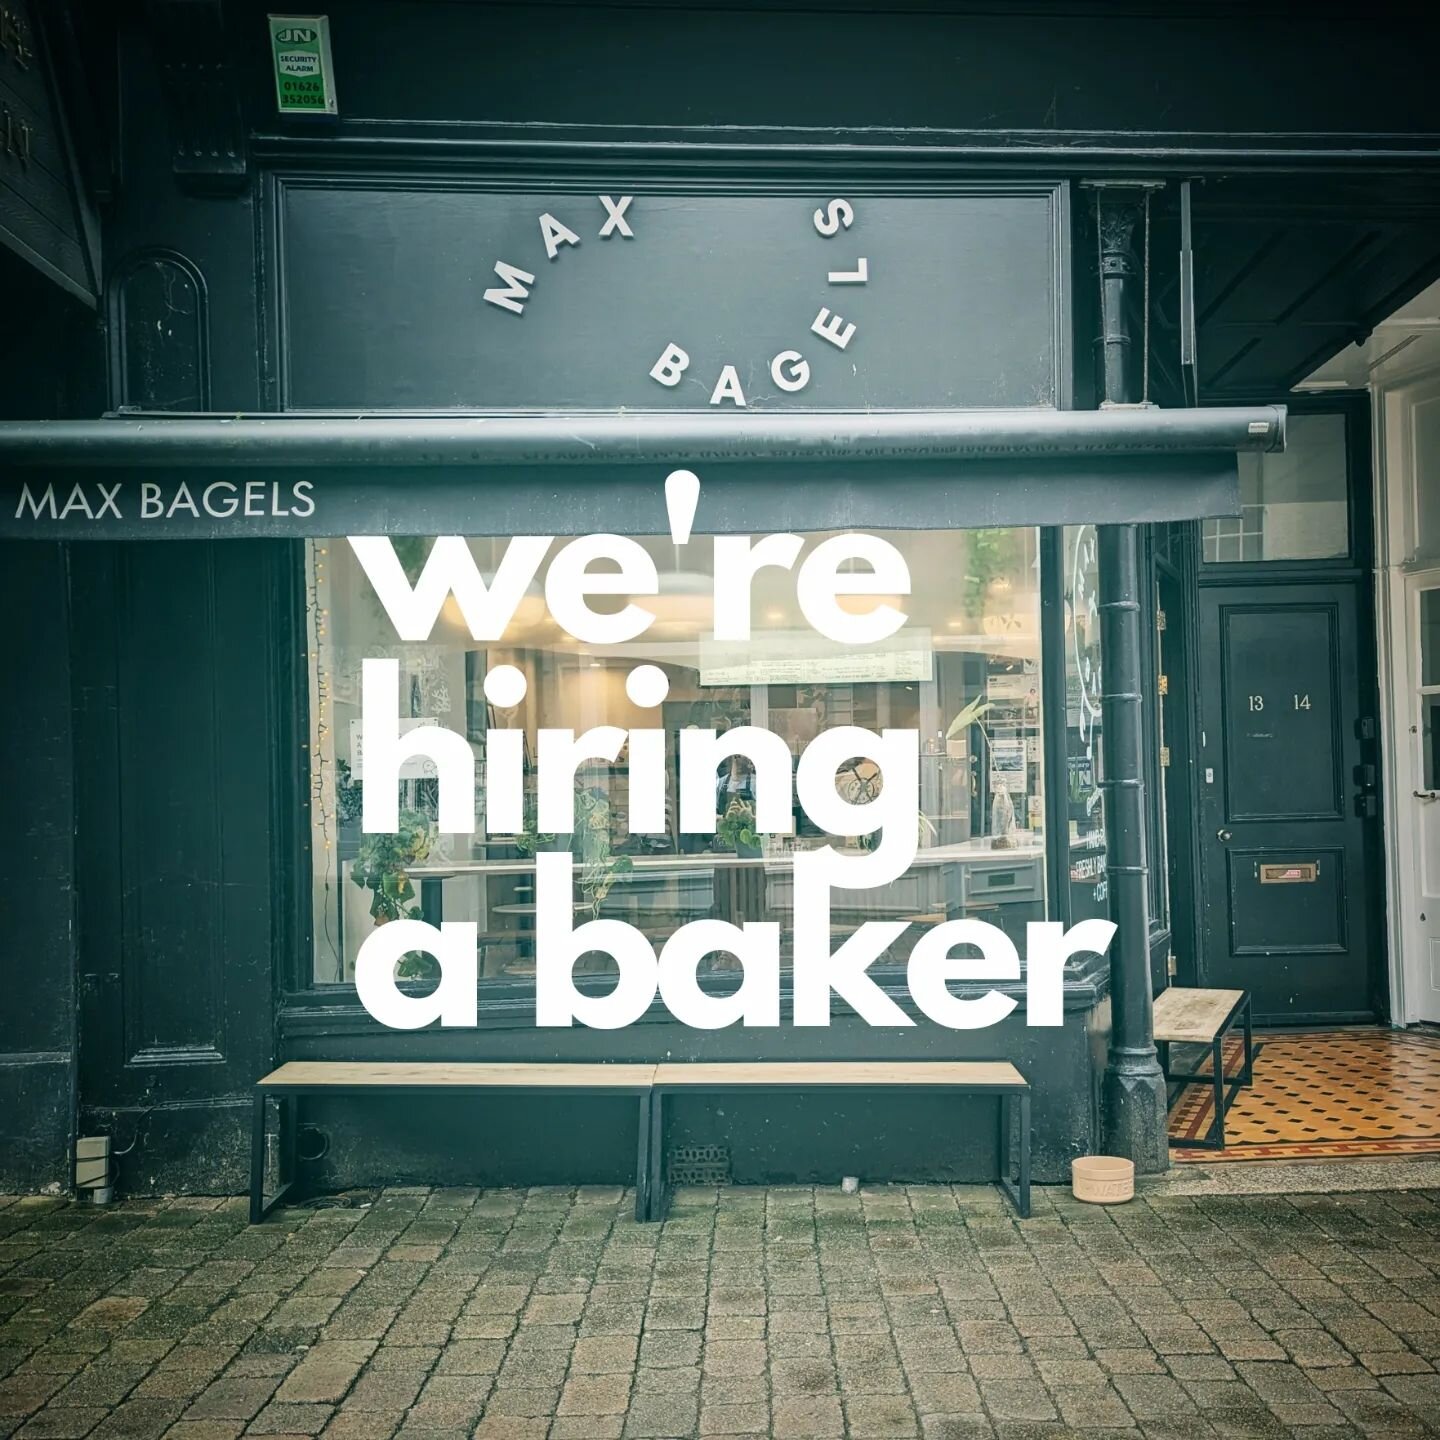 We're hiring a junior baker. 
If you want to make some dough (😜) and  you're interested in learning the craft of bagel making, get in touch. 
Send your CV's to everything@maxbagels.co.uk (subject: junior baker).